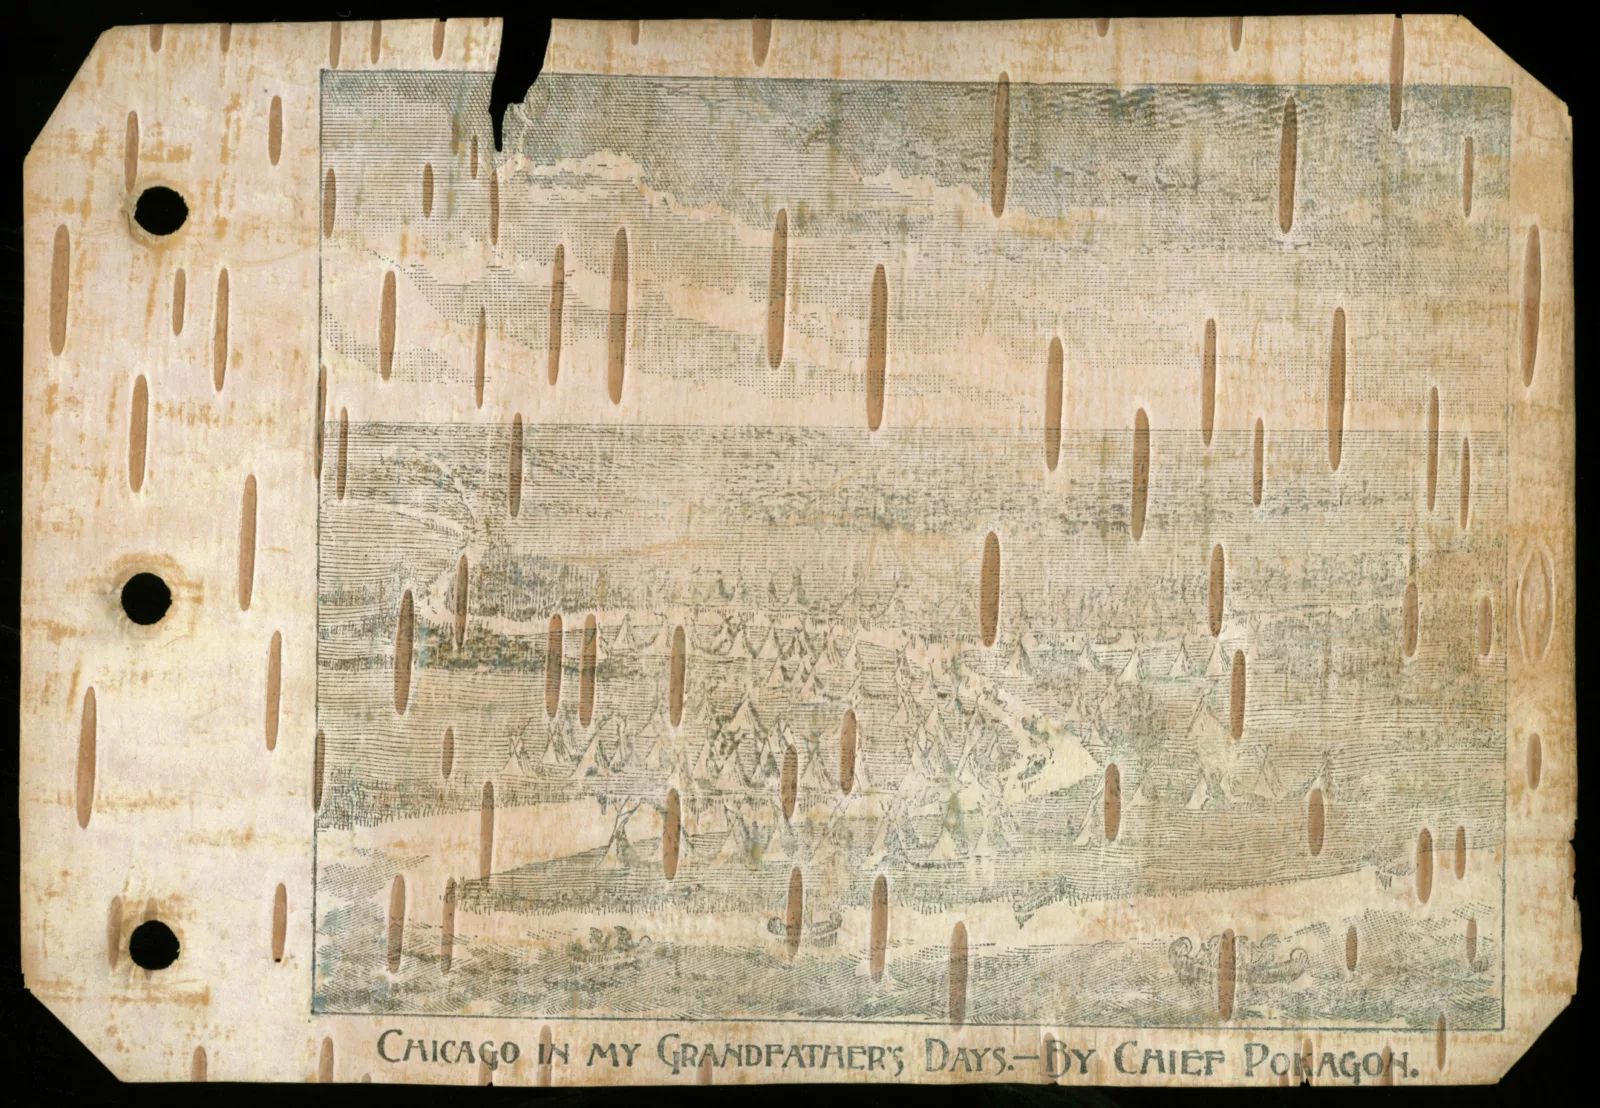 A map of Chicago printed on birchbark. The map depicts Native people, Native homes, and the river. Below the map are the words "Chicago in my Grandfather's Days"